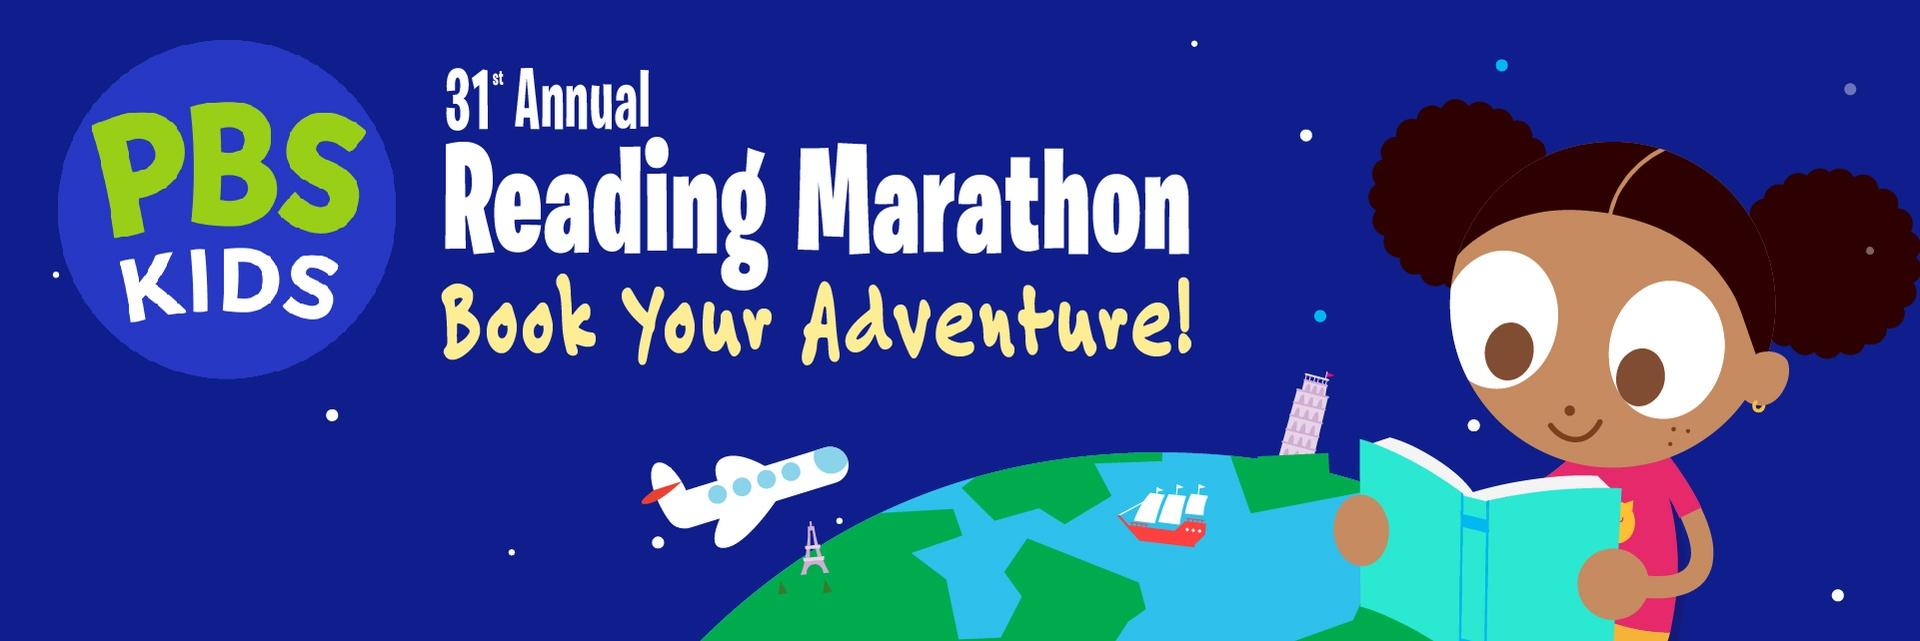 Permalink to:PBS 31st Annual Reading Marathon for Kids